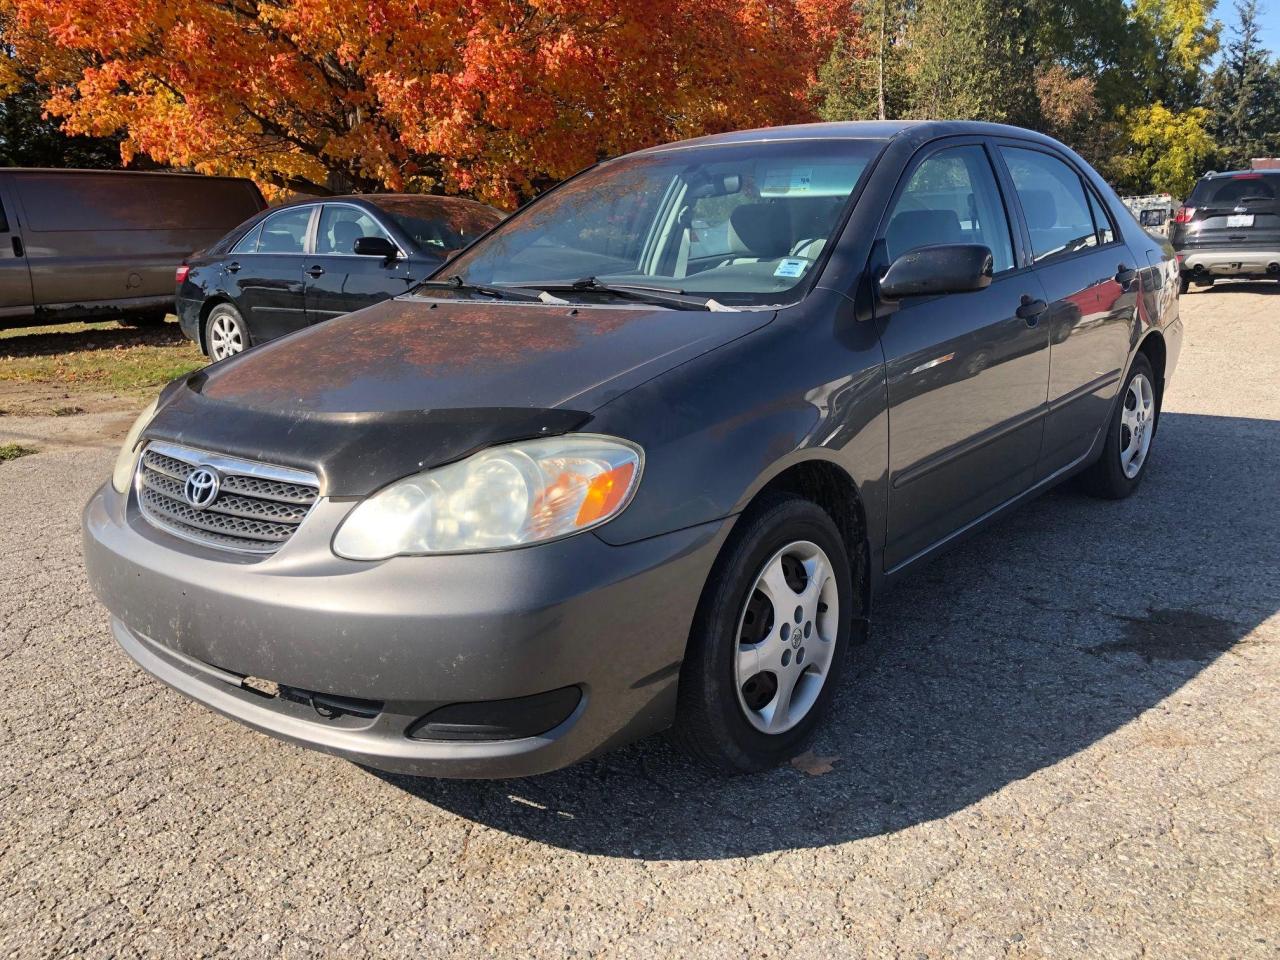 2007 Toyota Corolla CE**CLEAN*DRIVES GREAT*148 KMS*CLEAN CARFAX* - Photo #1